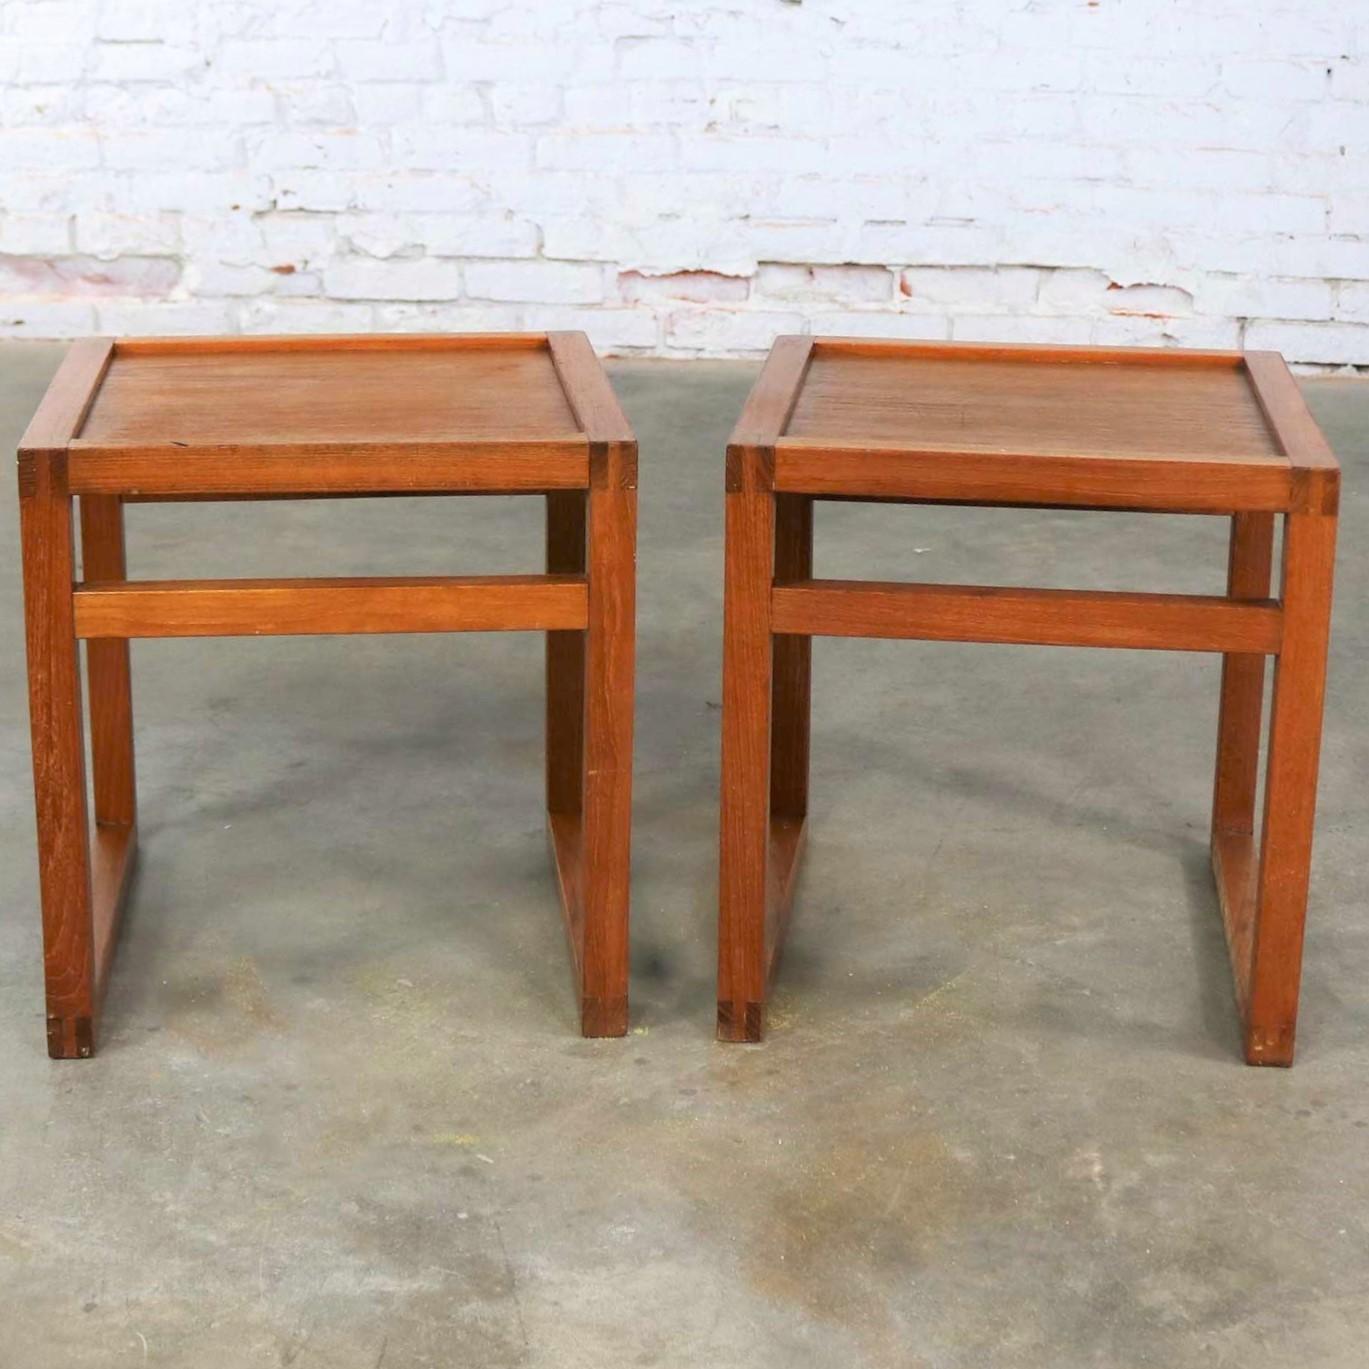 Handsome pair of Scandinavian Modern square side tables in teak with an open cube styling. They are in wonderful vintage condition with no outstanding flaws. Please see photos. Price is for the pair, circa 1960s.

Sometimes you just need little